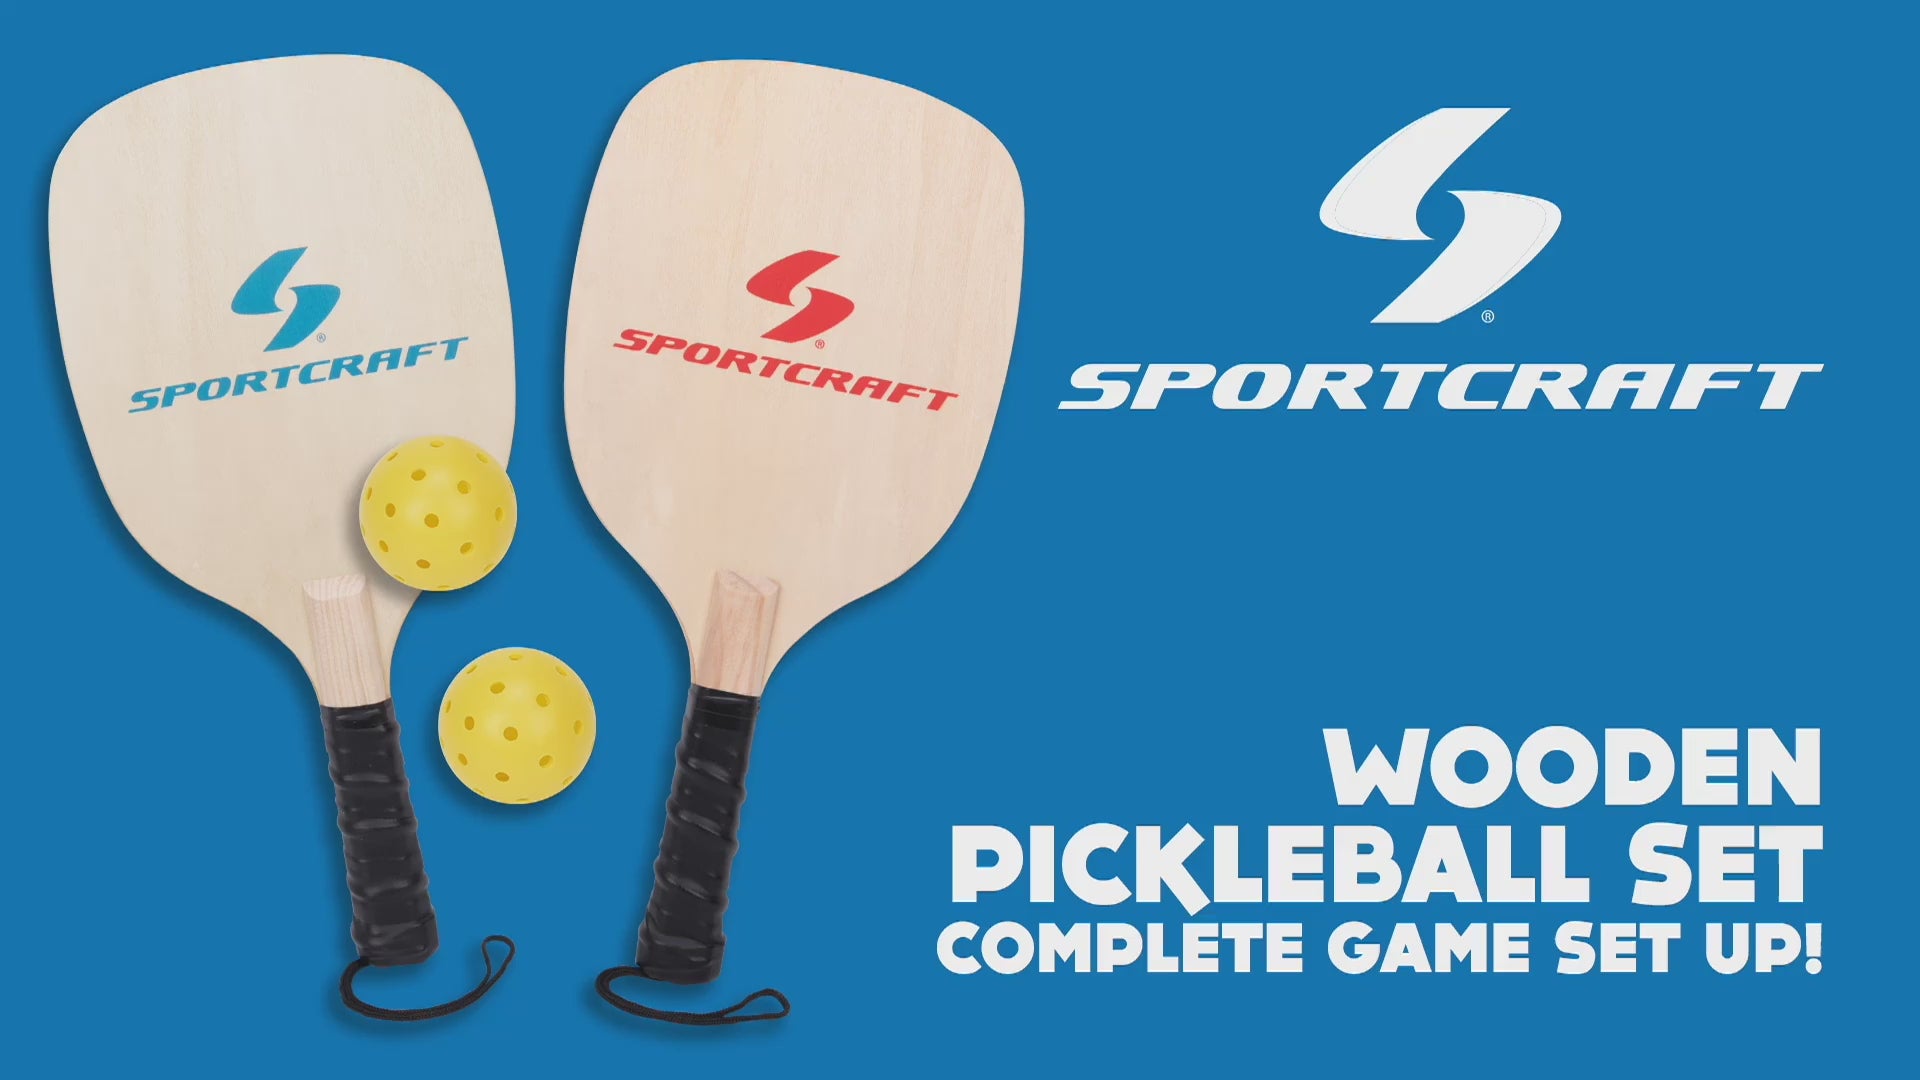 Sportcraft PickleBall Set - Video showing product